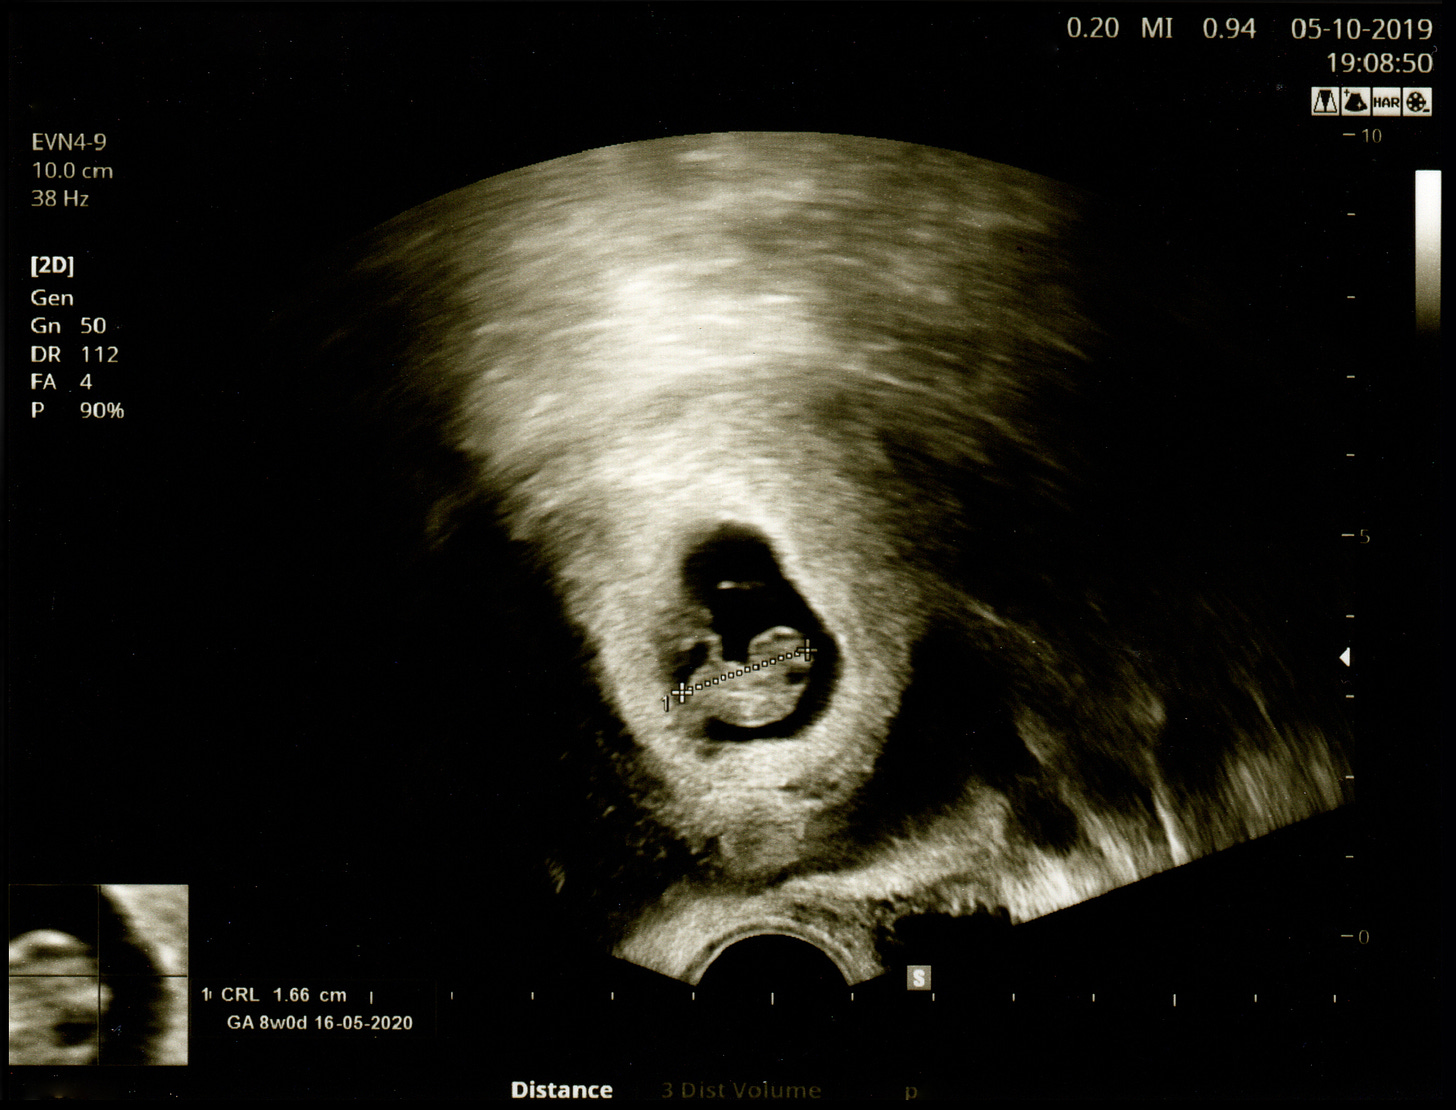 image of an ultrasound film or screenshot showing a small human embryo in the mother's uterus